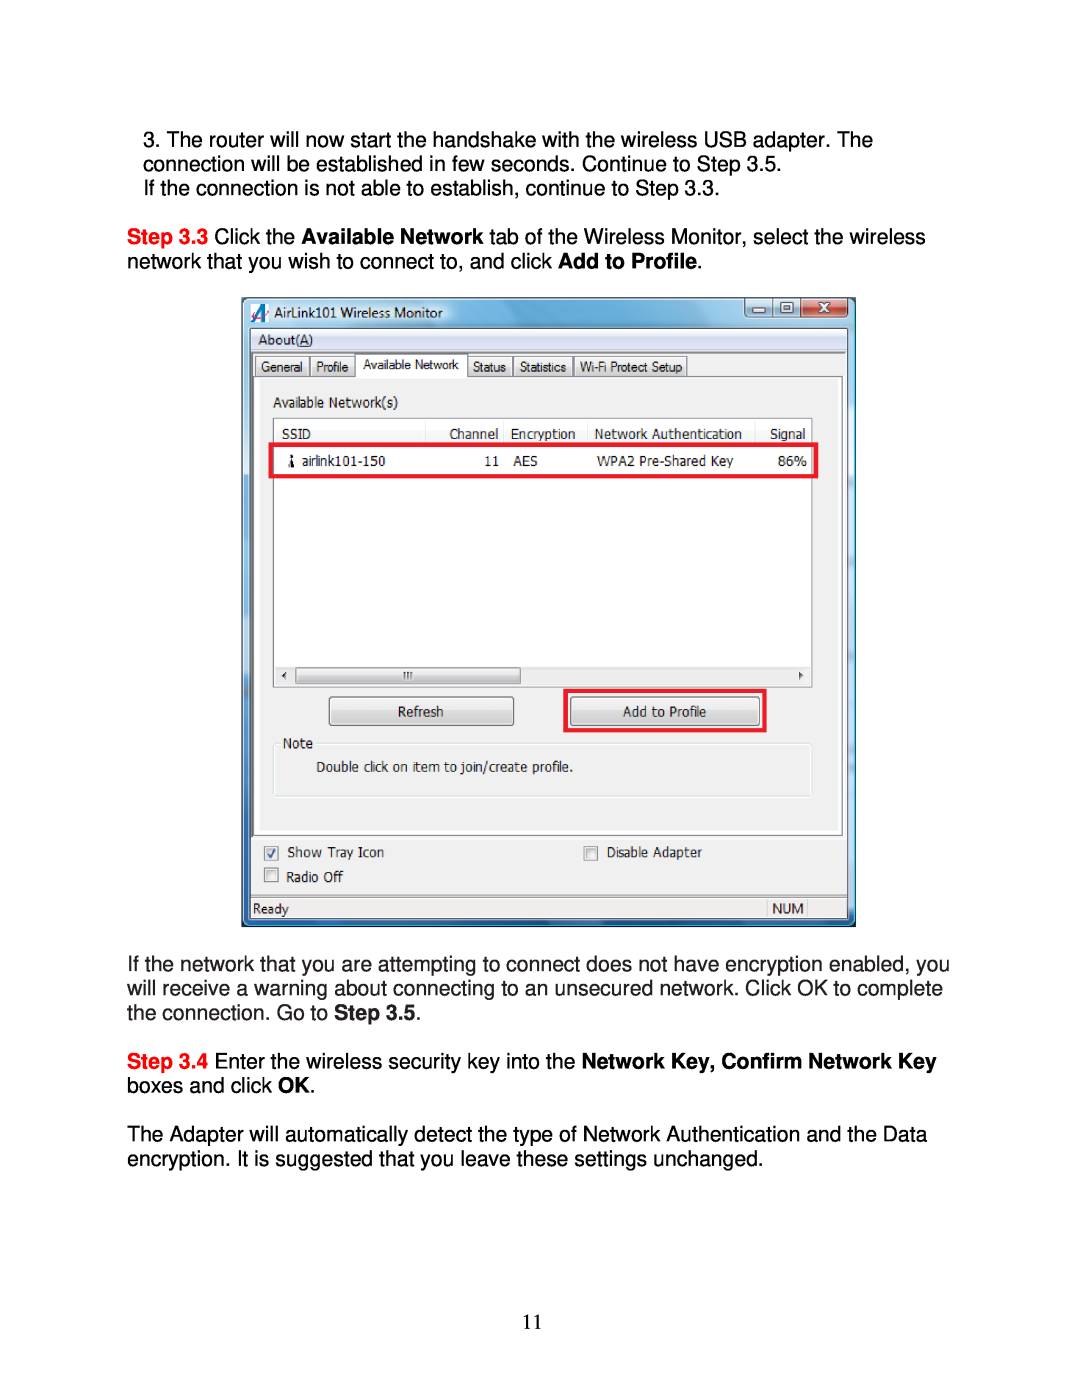 Airlink101 AWLL5077 user manual If the connection is not able to establish, continue to Step 